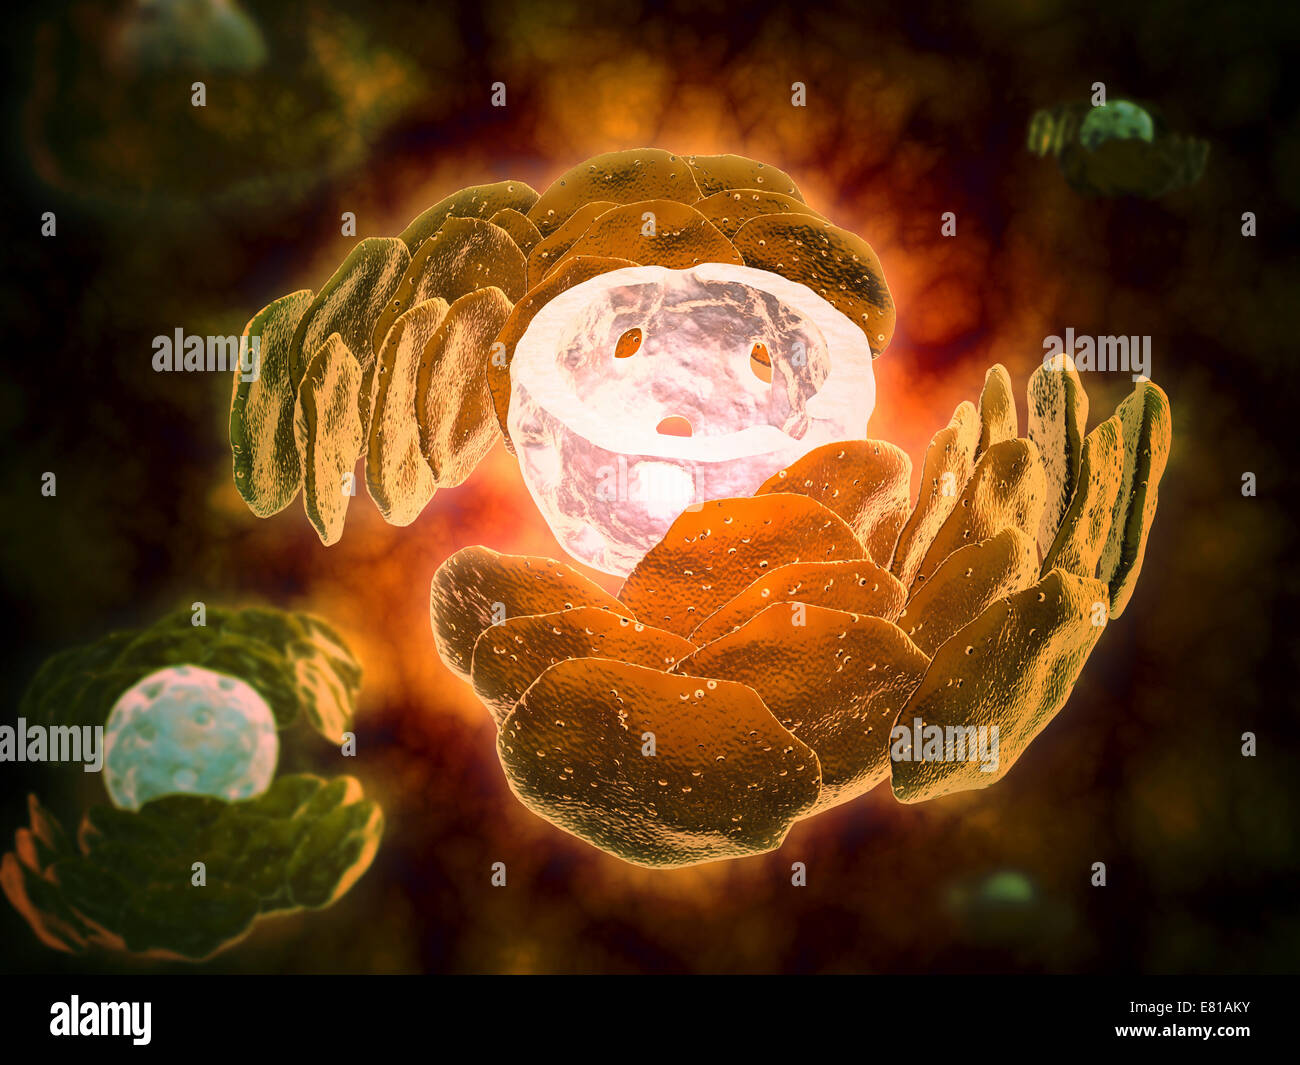 Conceptual image of endoplasmic reticulum around a cell nucleus. Endoplasmic reticulum is an organelle that forms a continuous m Stock Photo